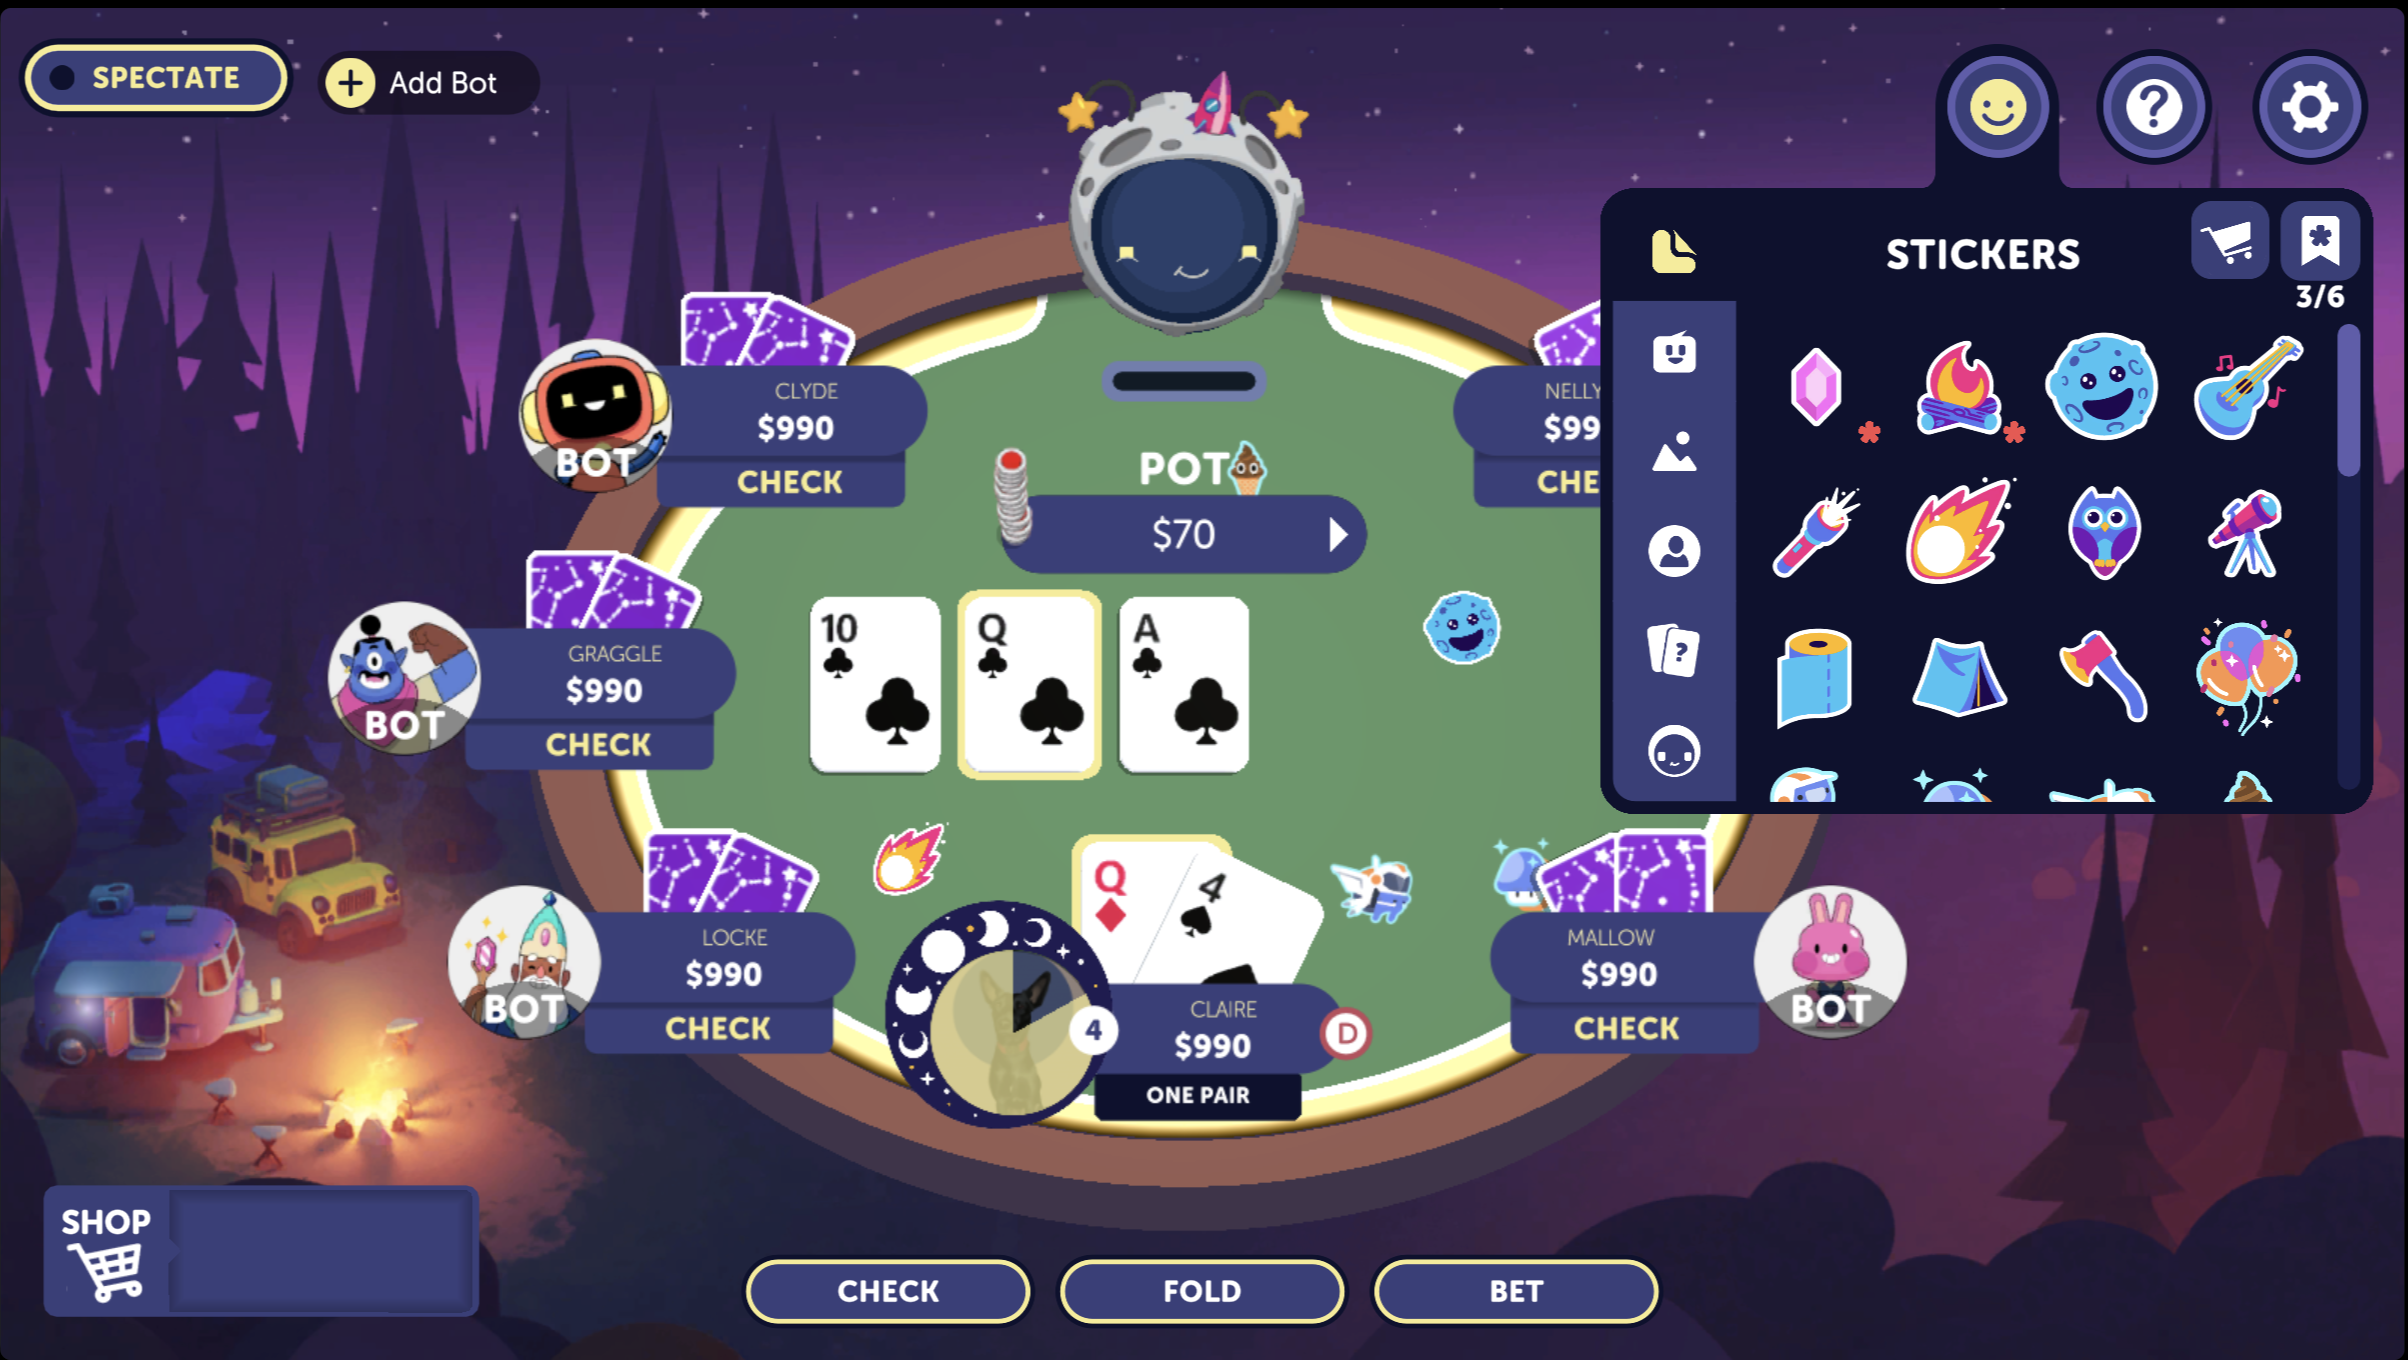 How to Play Poker Discord?